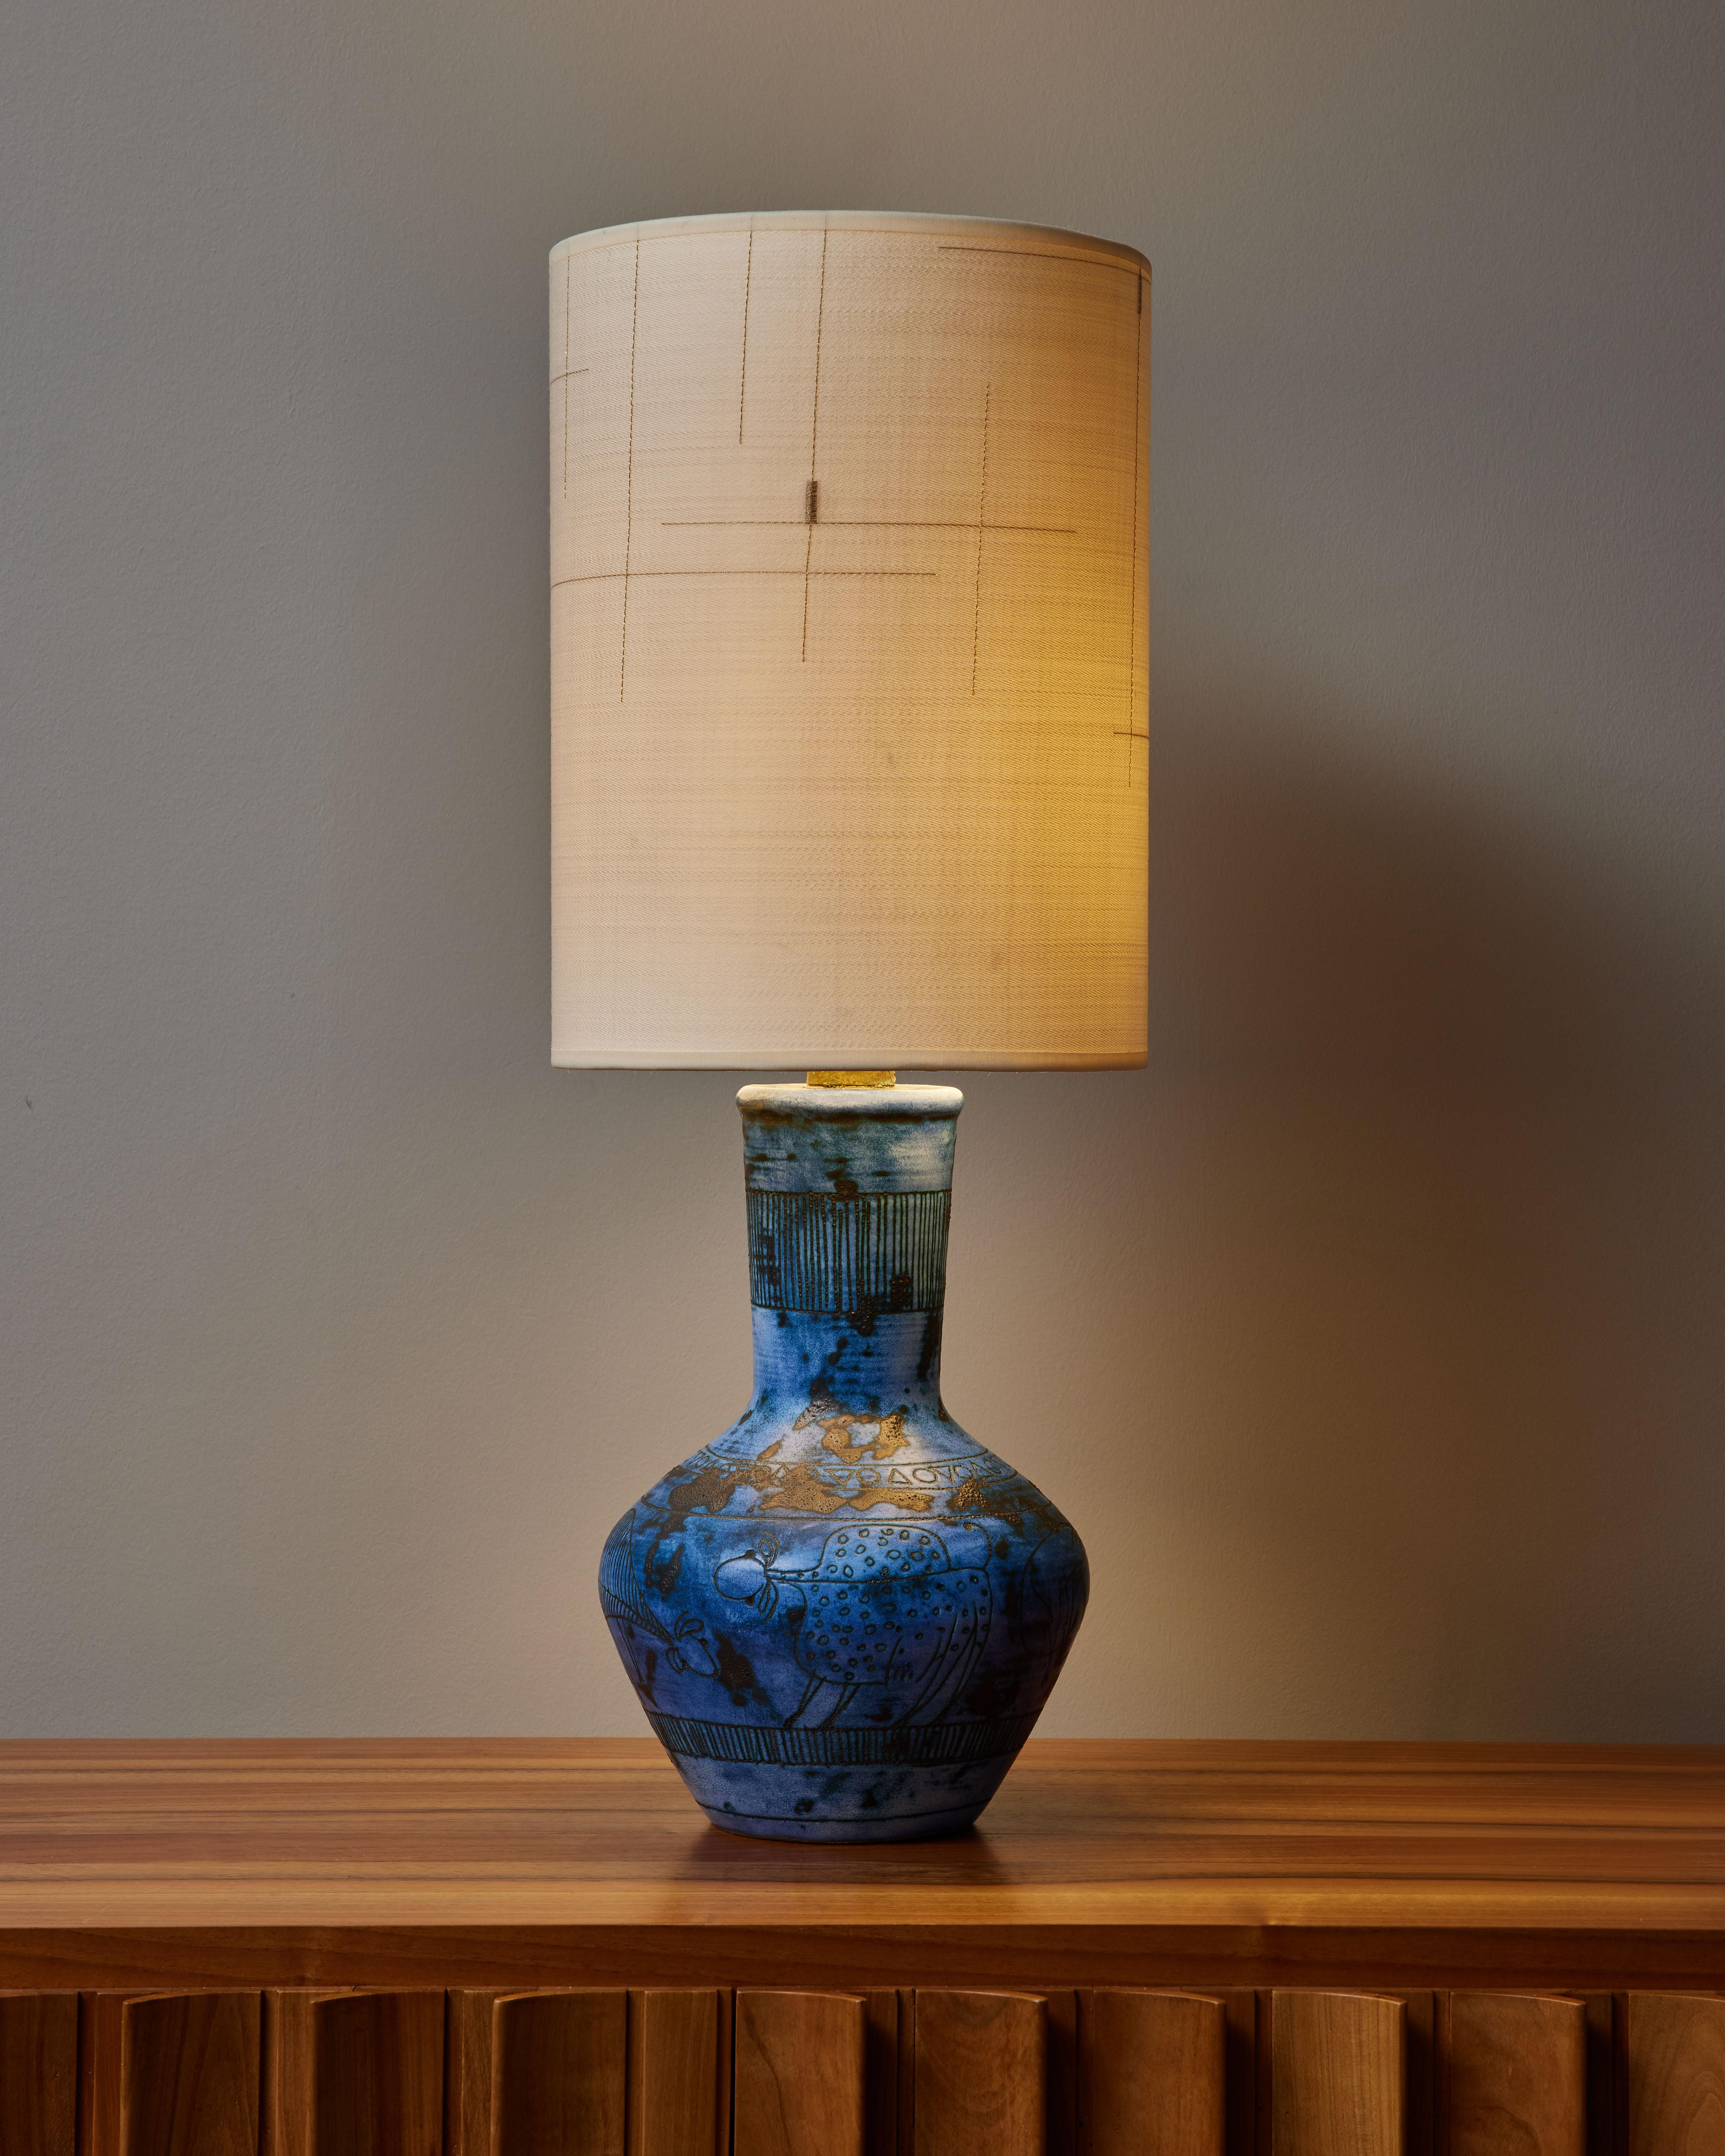 Blue ceramic table lamp by Jacques Blin, in a baluster shape, with engraved stylized animals and geometrical patterns. 
Signed at the bottom, new lampshade made with DEDAR fabric.

Jacques Blin (1920-1995) Jacques Blin is a well-known French